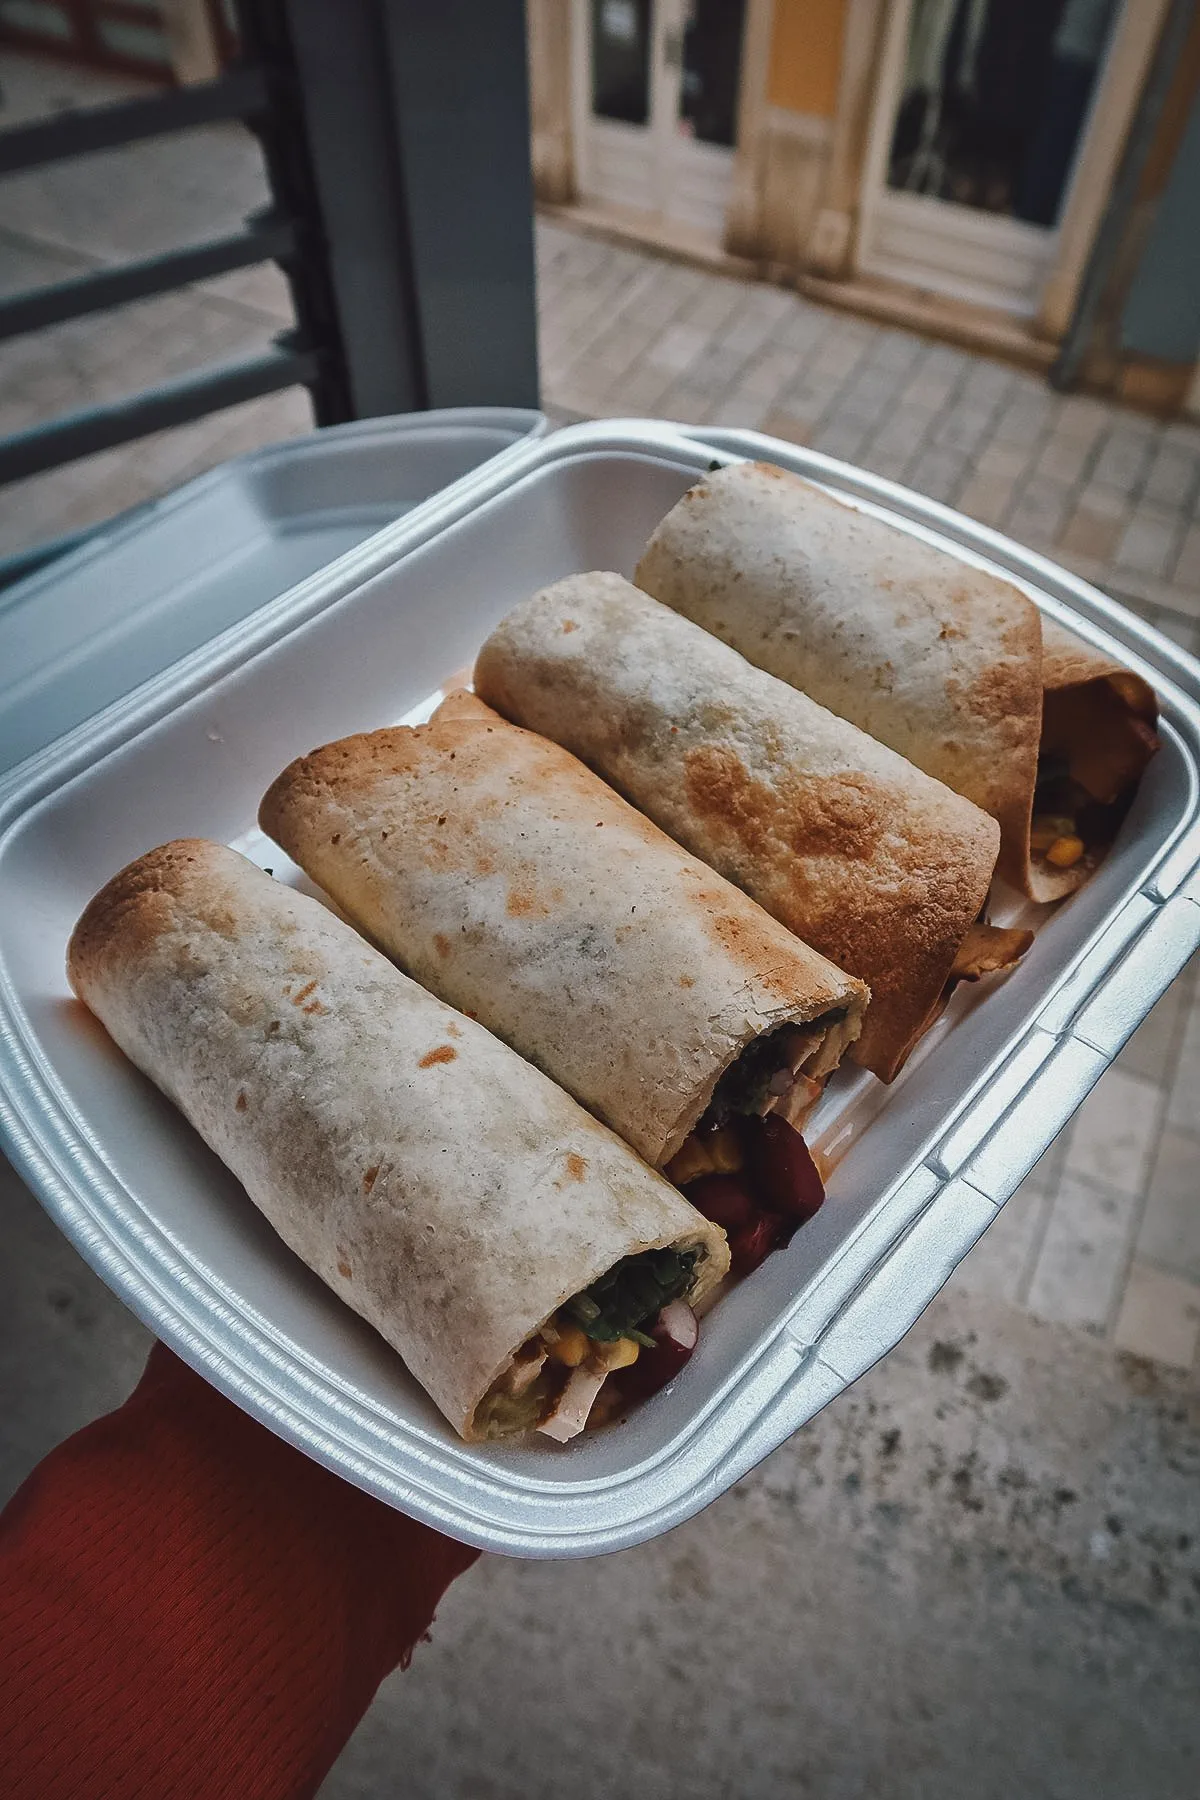 Tofu wraps from a restaurant in Rovinj